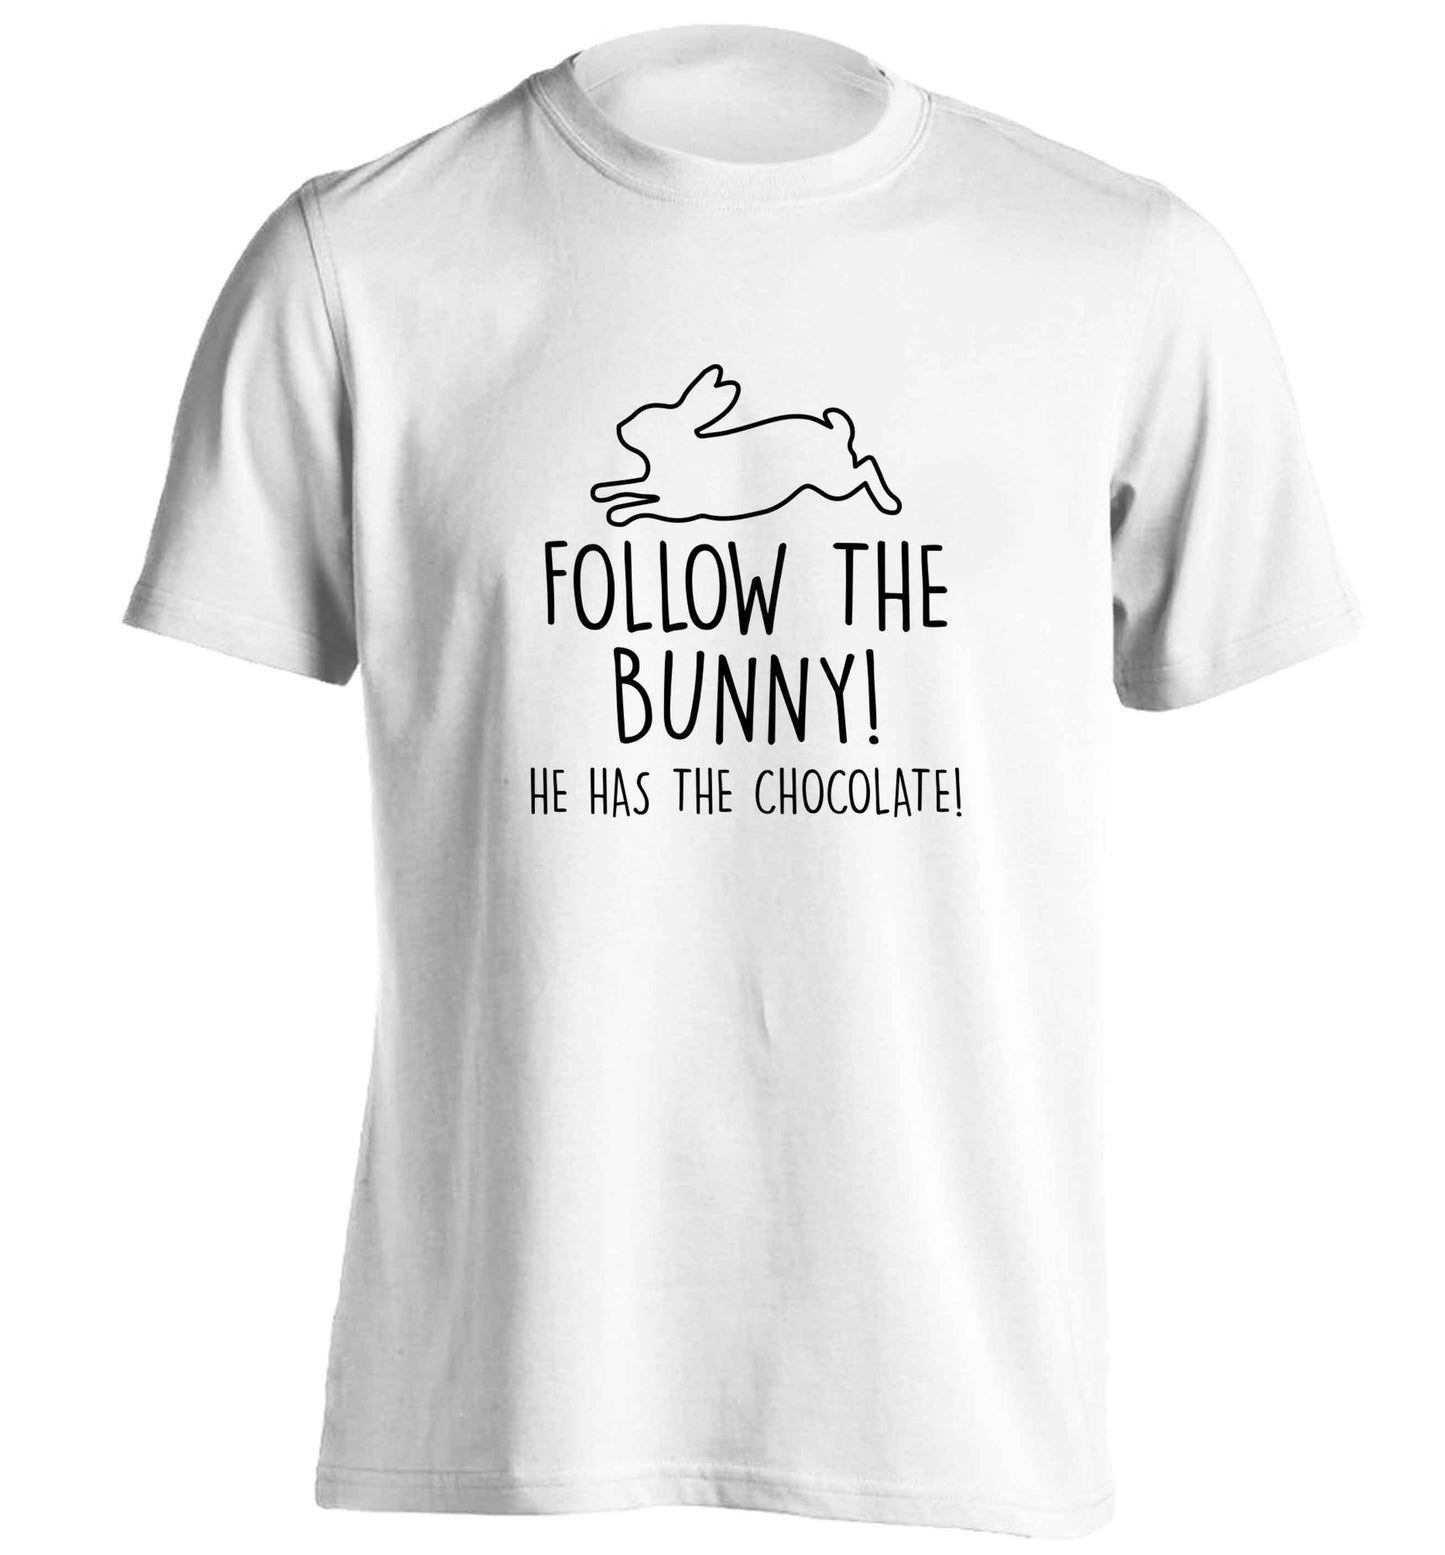 Follow the bunny! He has the chocolate adults unisex white Tshirt 2XL